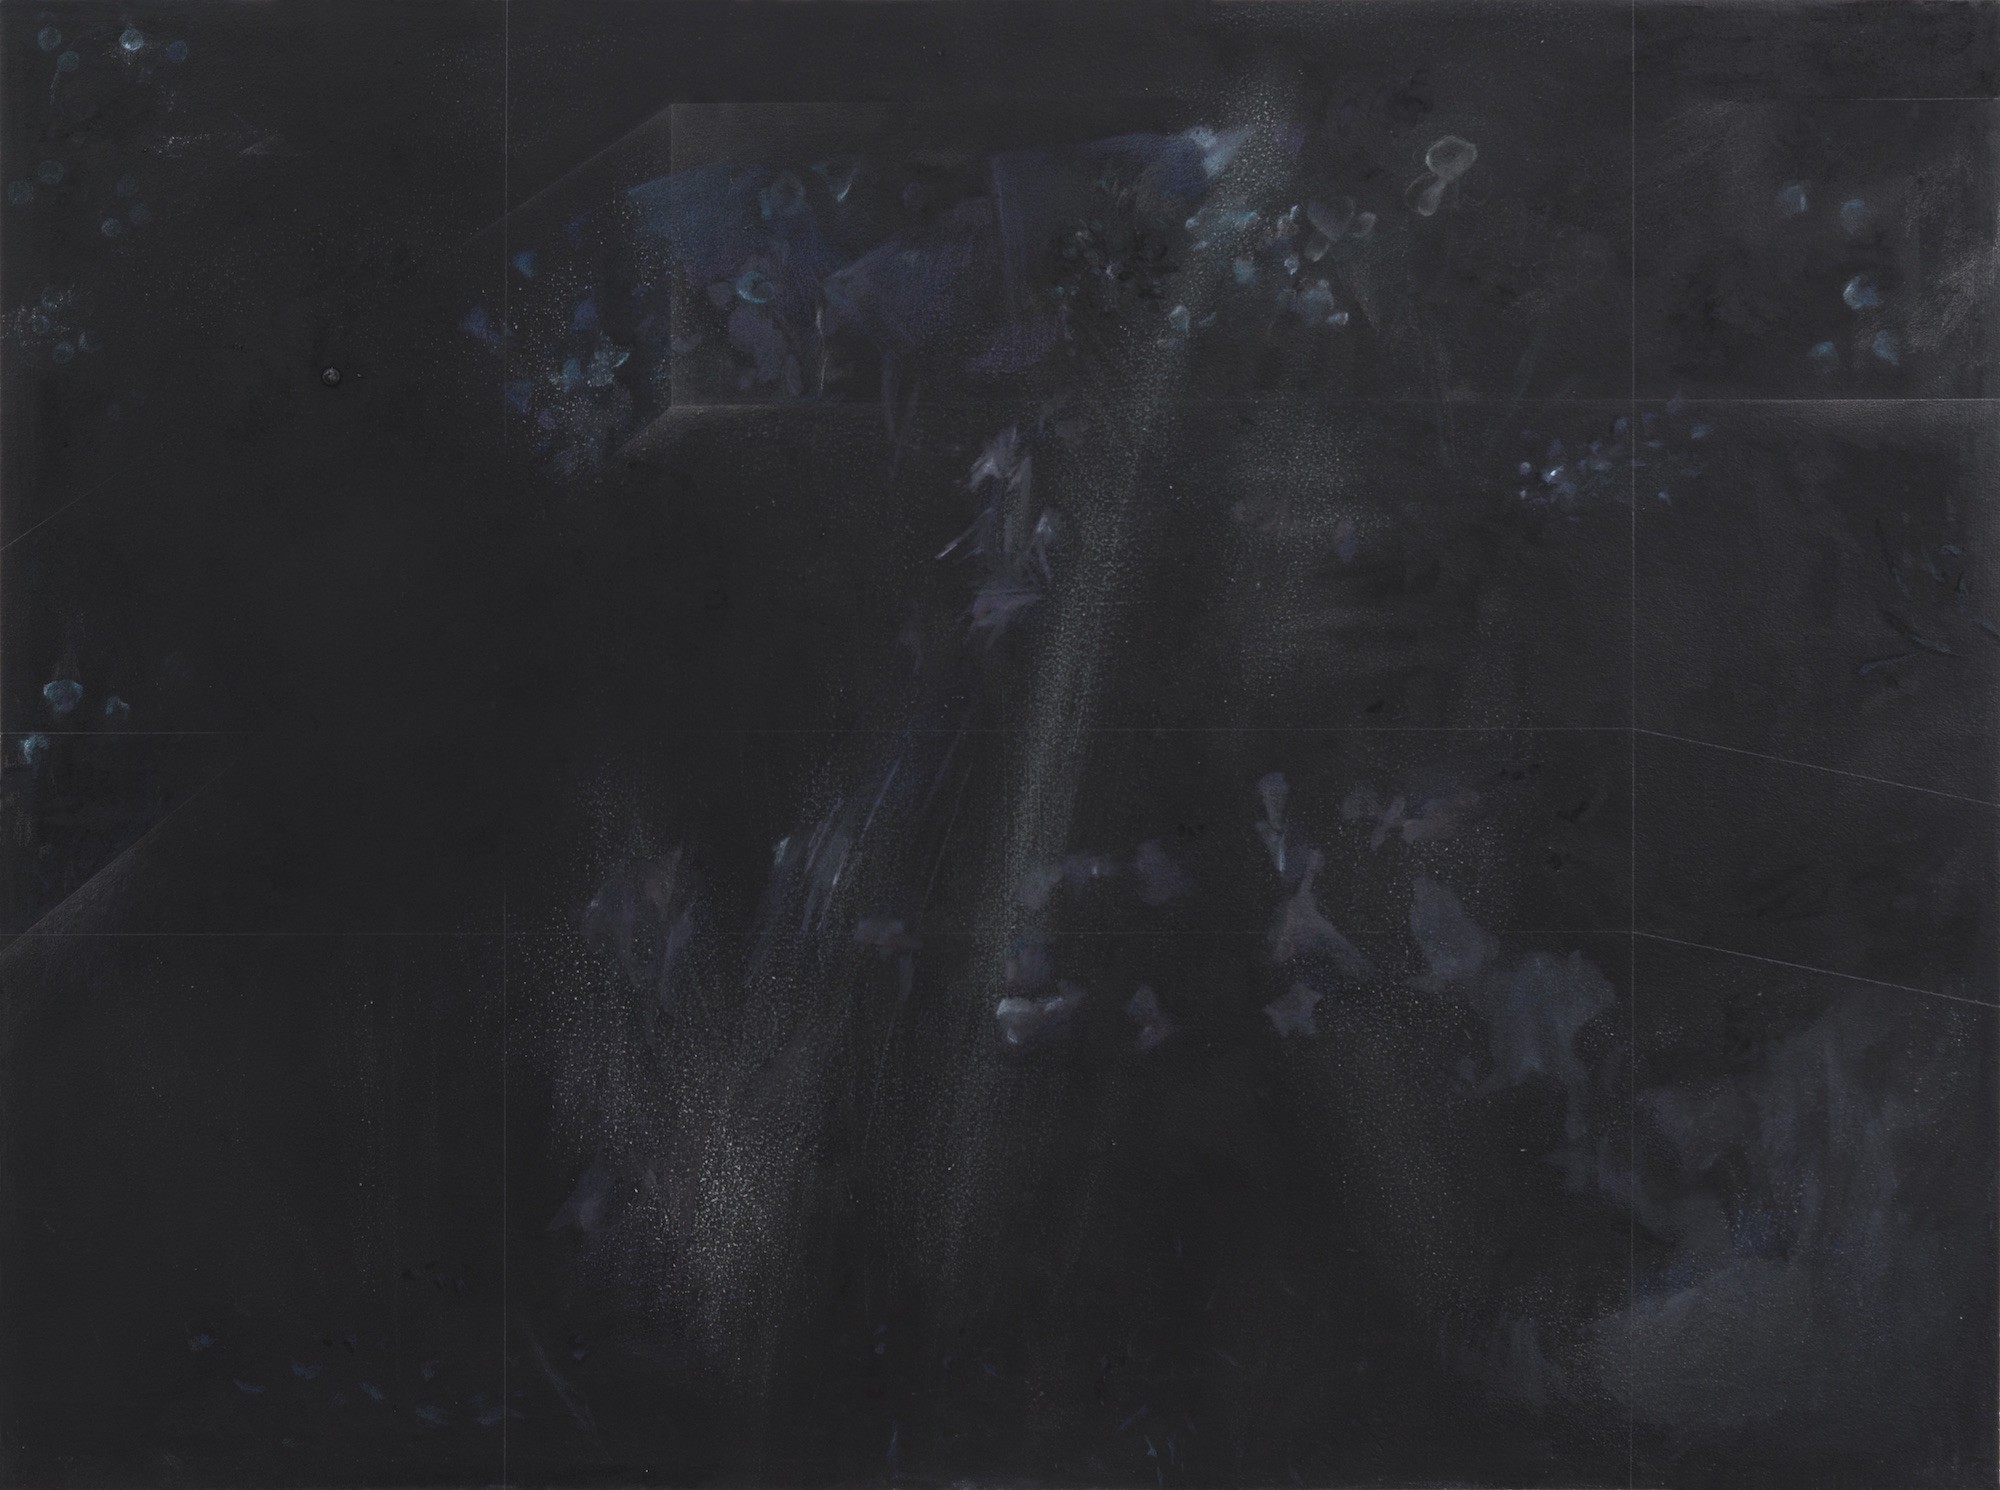 VON ANDEREN WELTEN, 05/2014 I - Pencil, acrylic, oil on wall, 46 x 62 in. / 117 x 157 cm (painted over, exists as video projection)